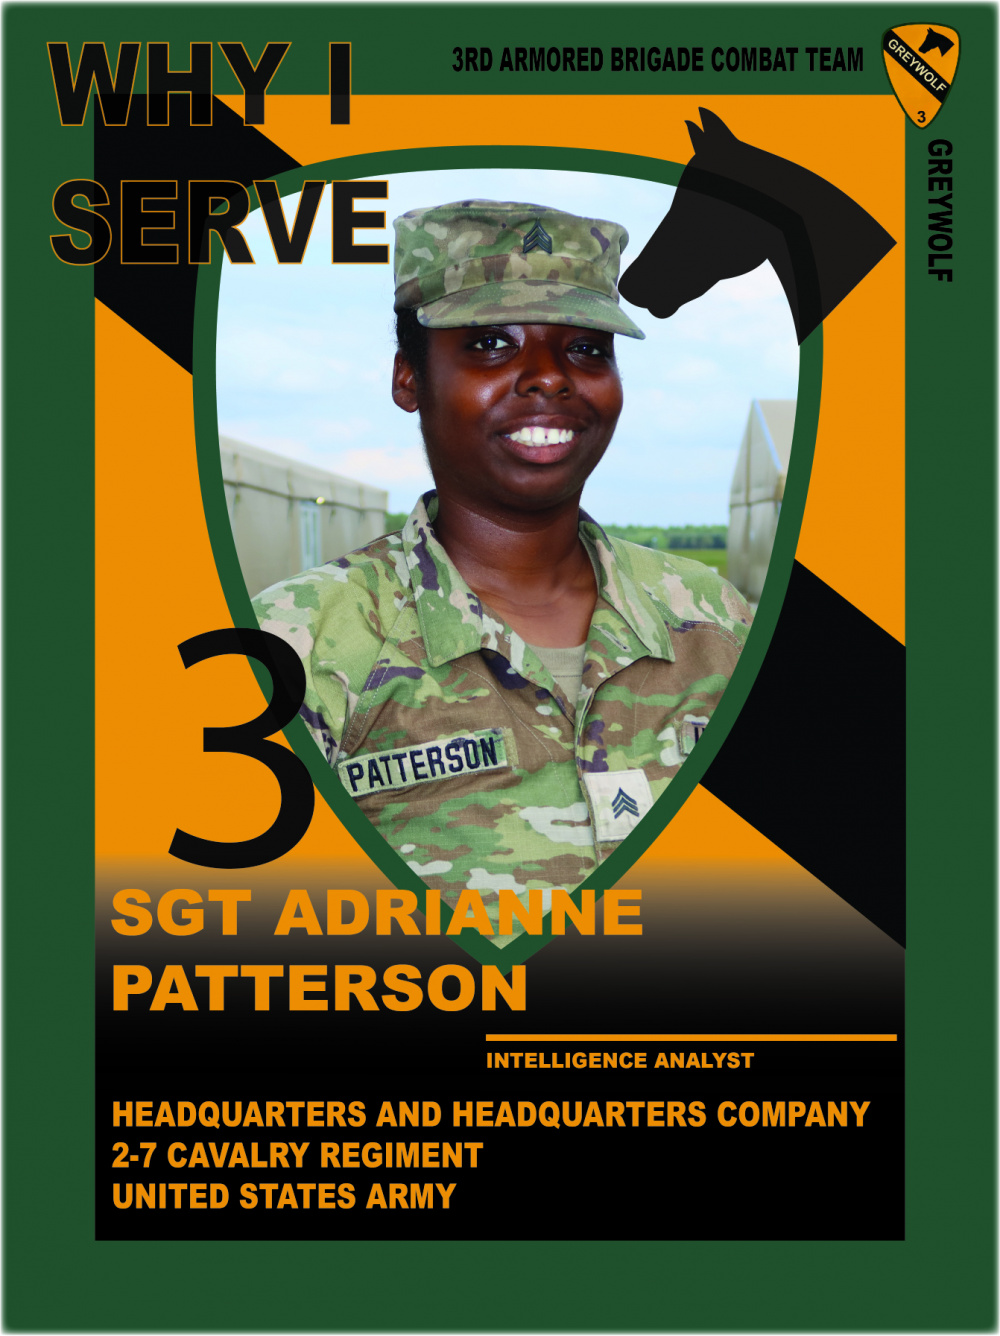 Why I Serve - Sgt. Adrianne Patterson